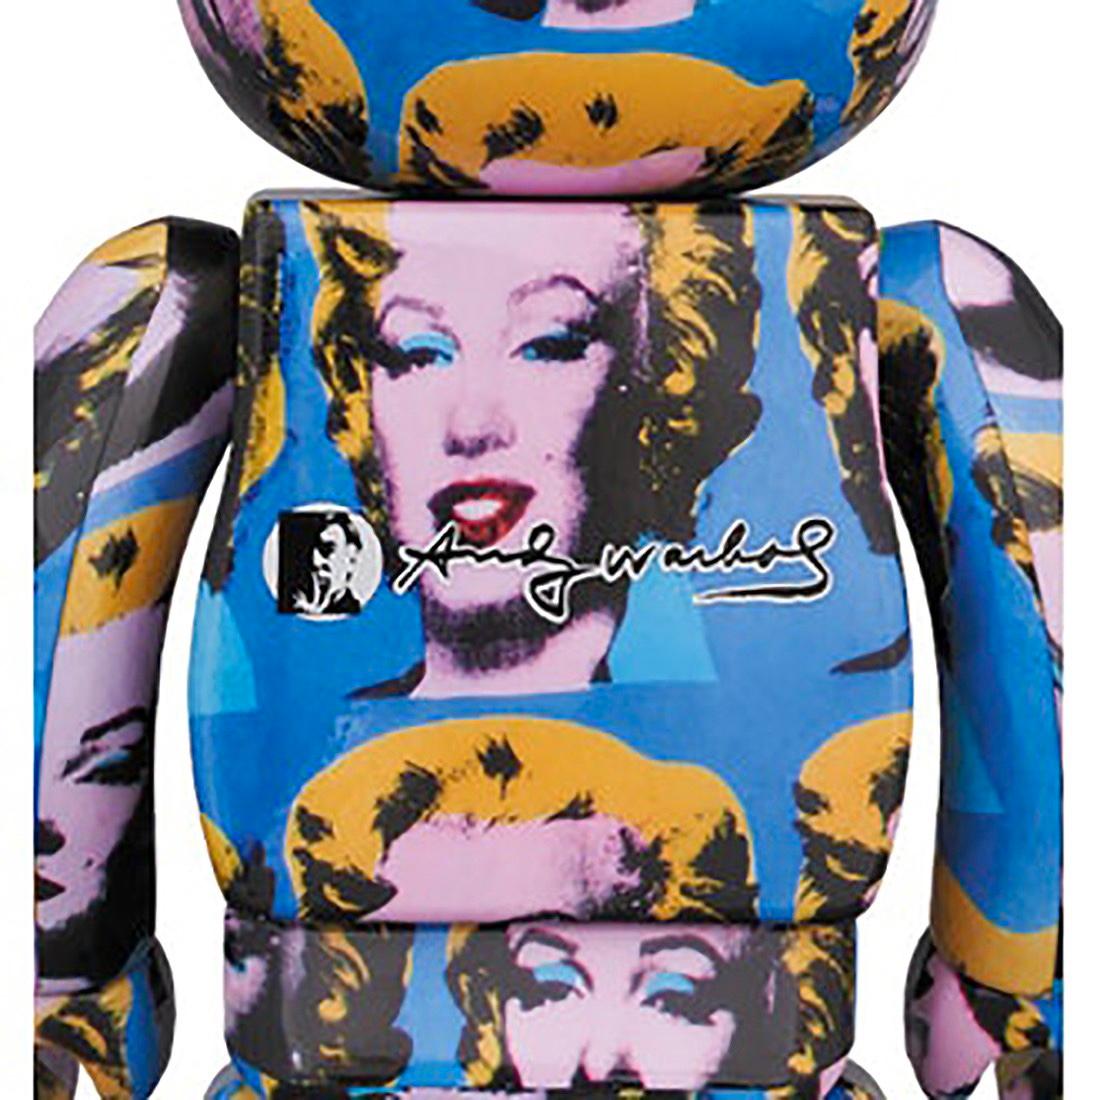 Andy Warhol Marilyn Bearbrick 400% Companion (Warhol BE@RBRICK 400%) - Contemporary Print by (after) Andy Warhol